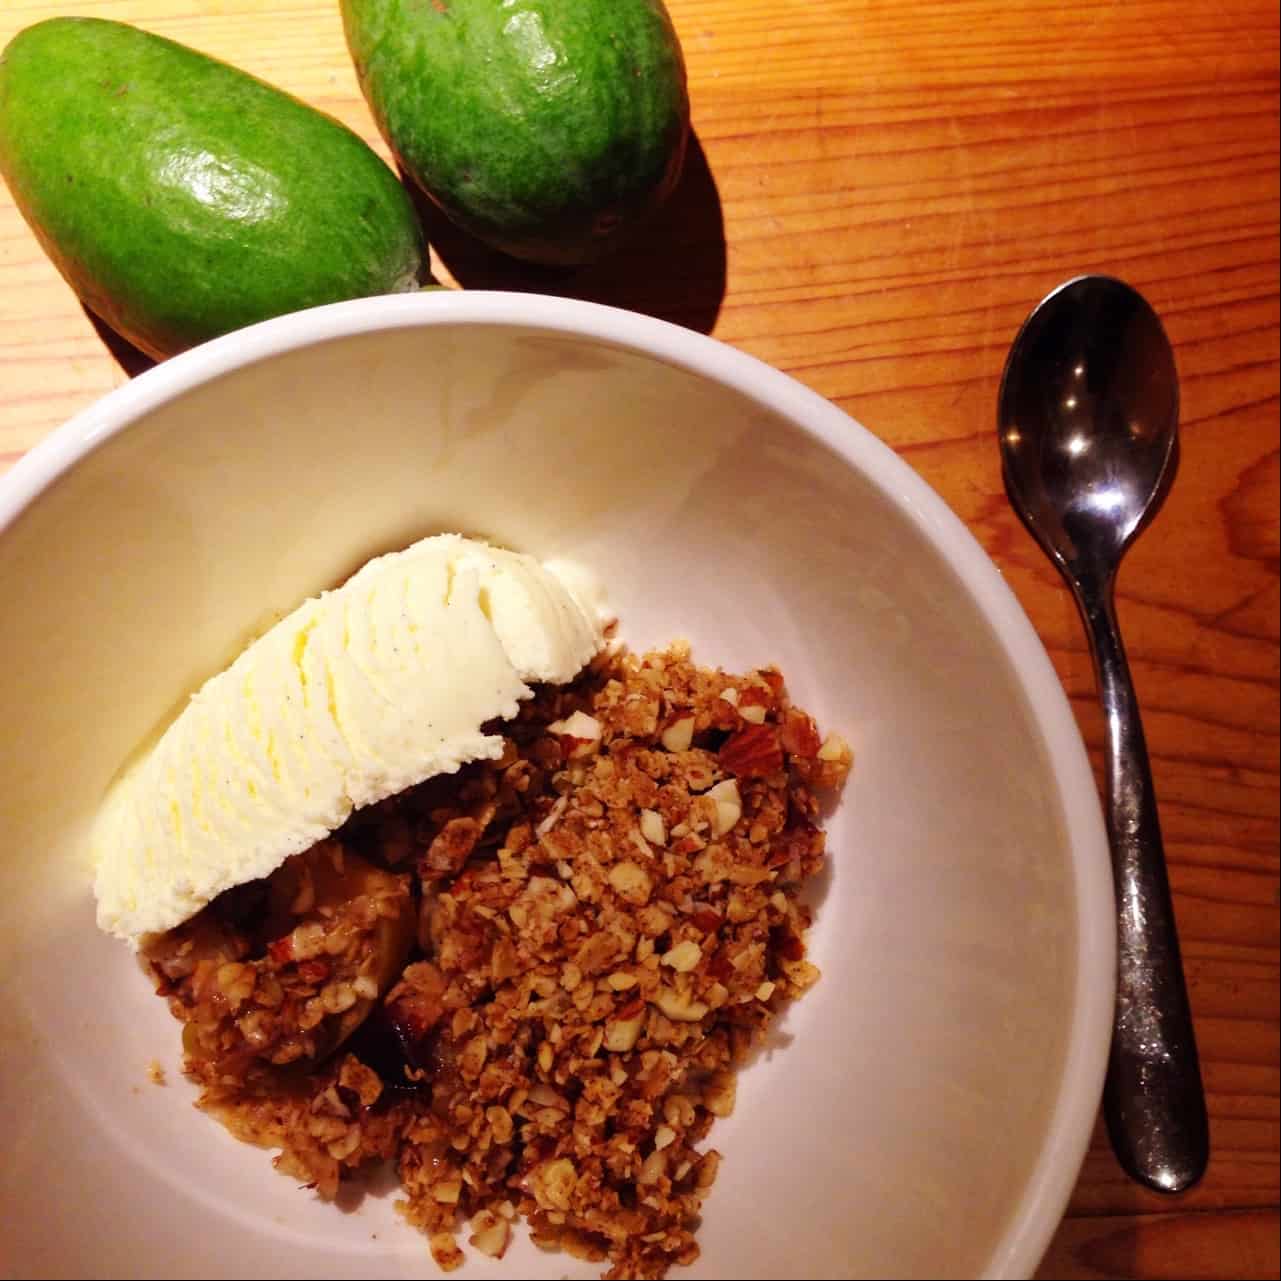 Healthy feijoa crumble - with just a tiny bit of ice cream. Yum!